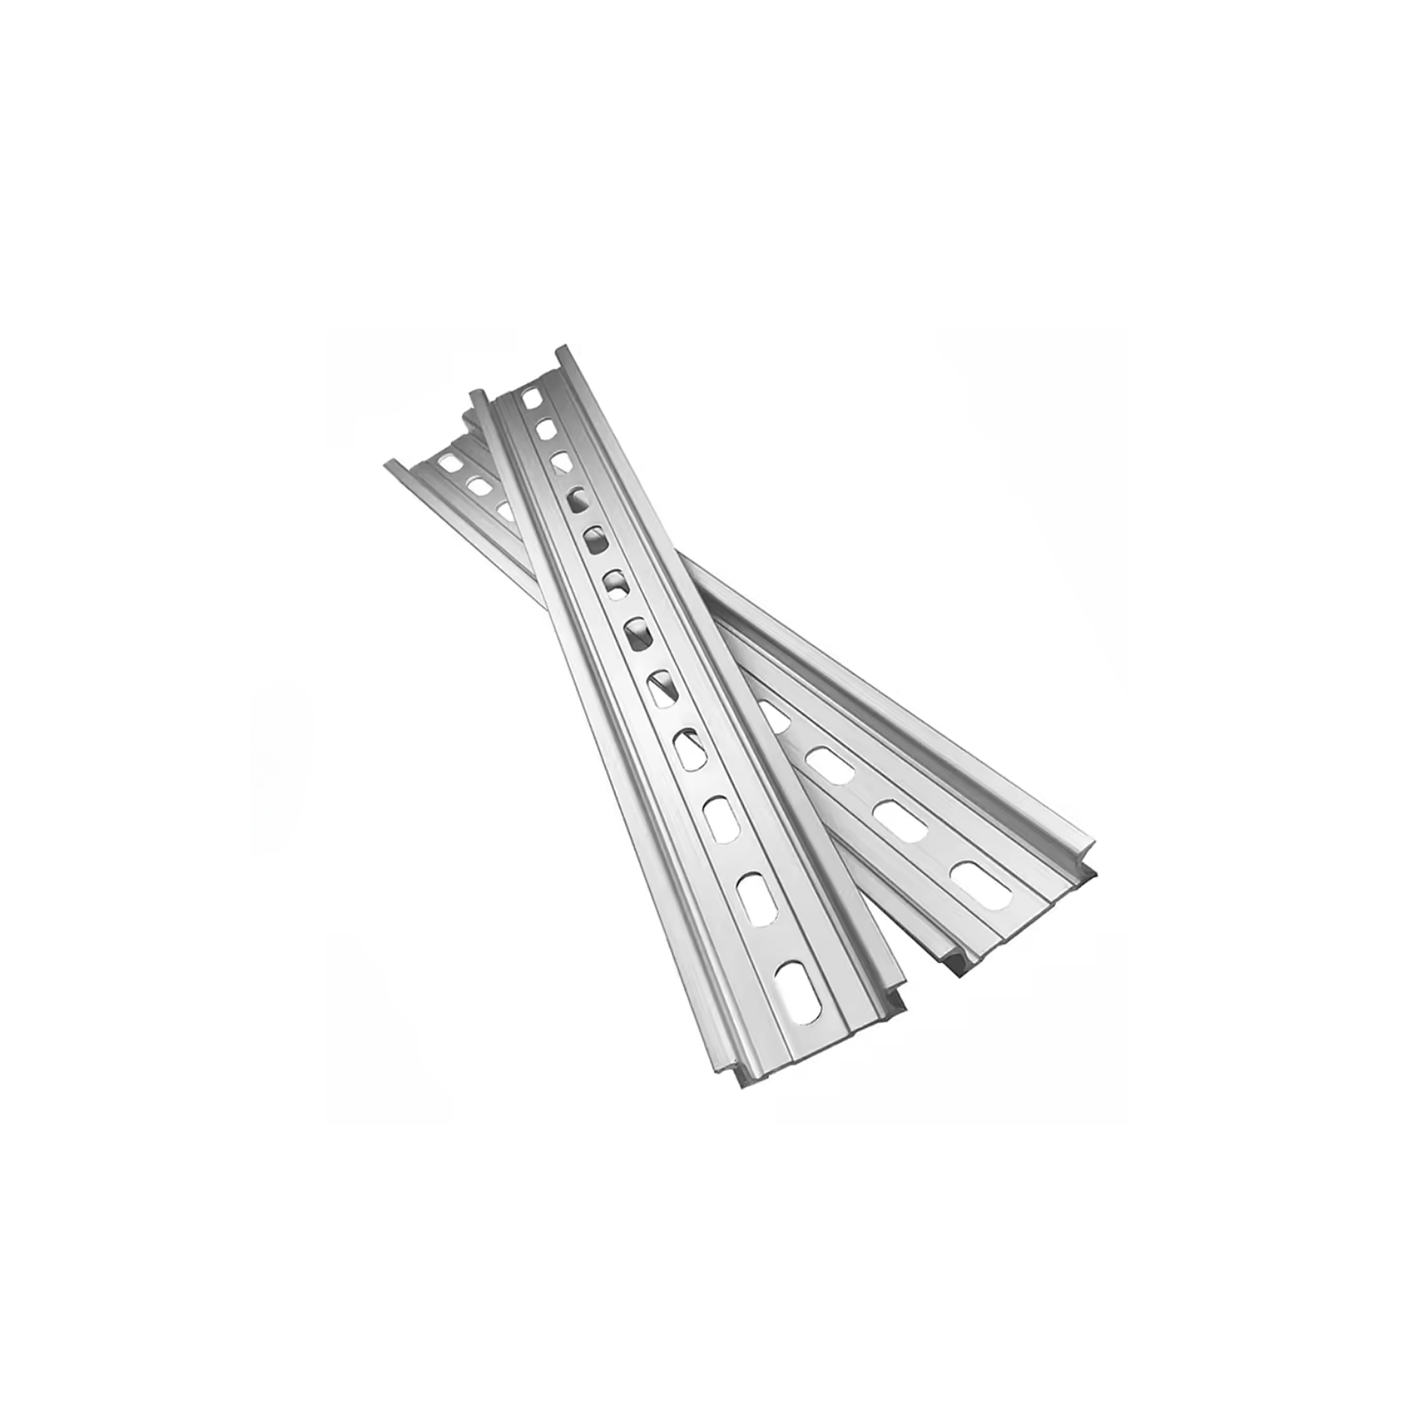 Andry C Channel Hot Steel Surface DIN Material Bracket Mounting